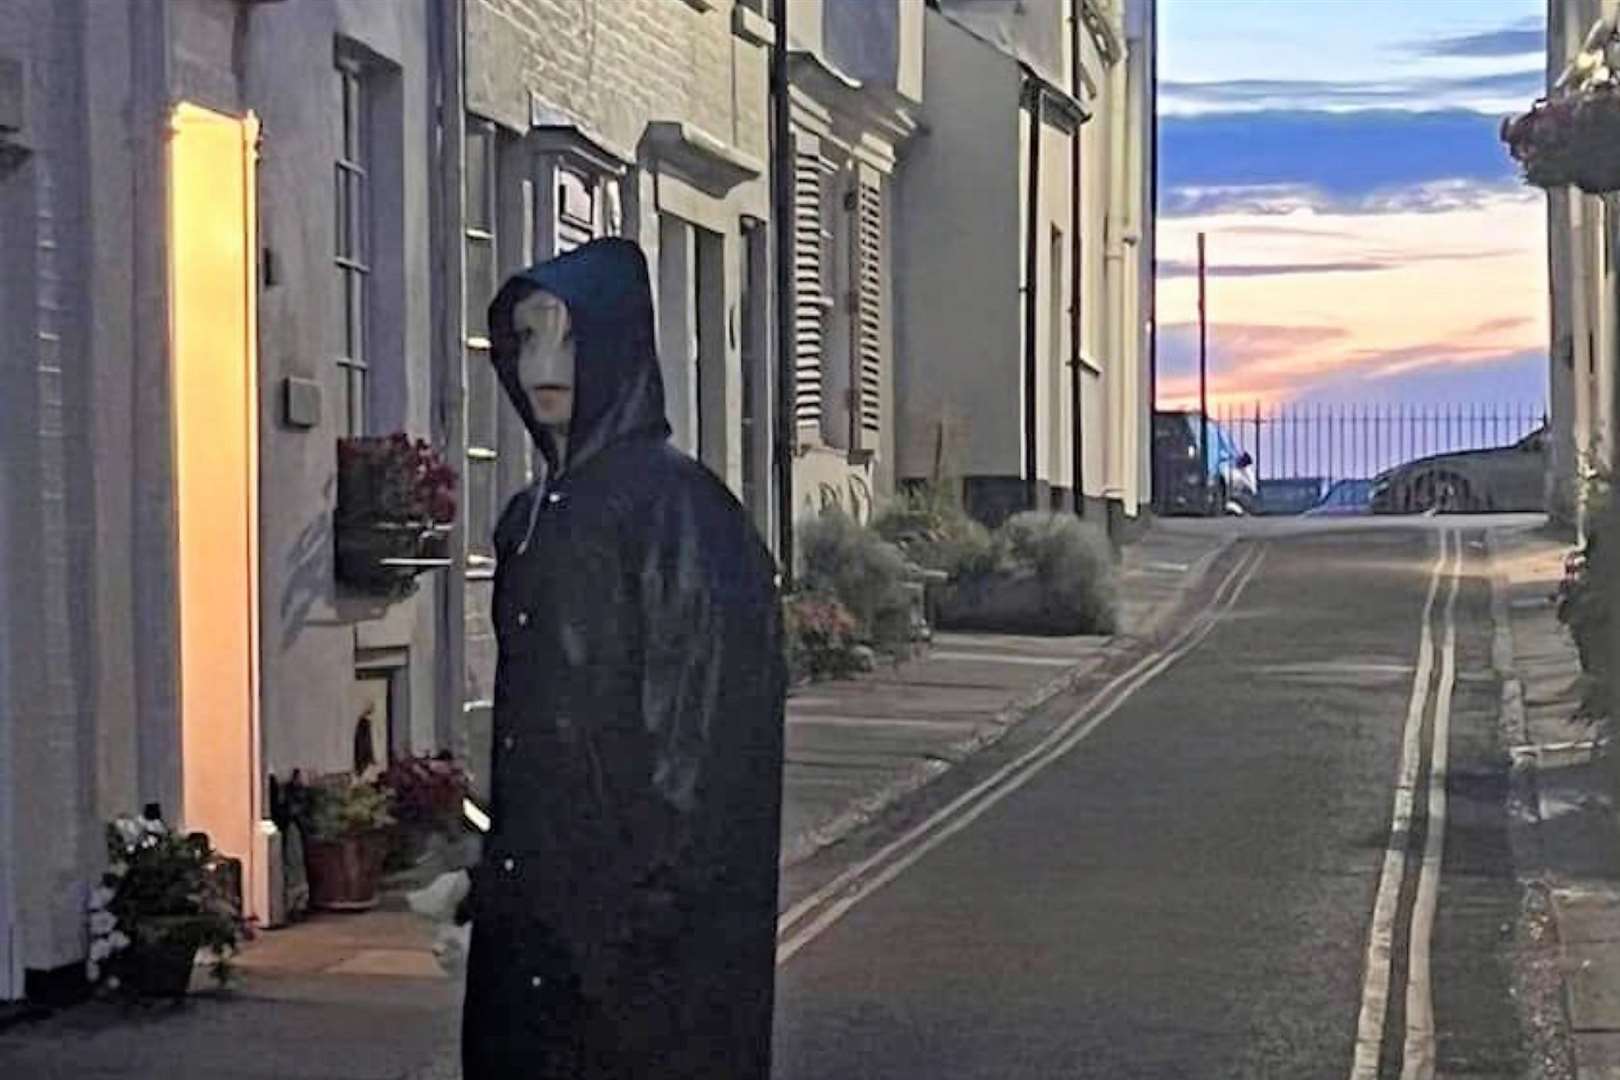 The creepy character in white mask and long black coat seen in Deal